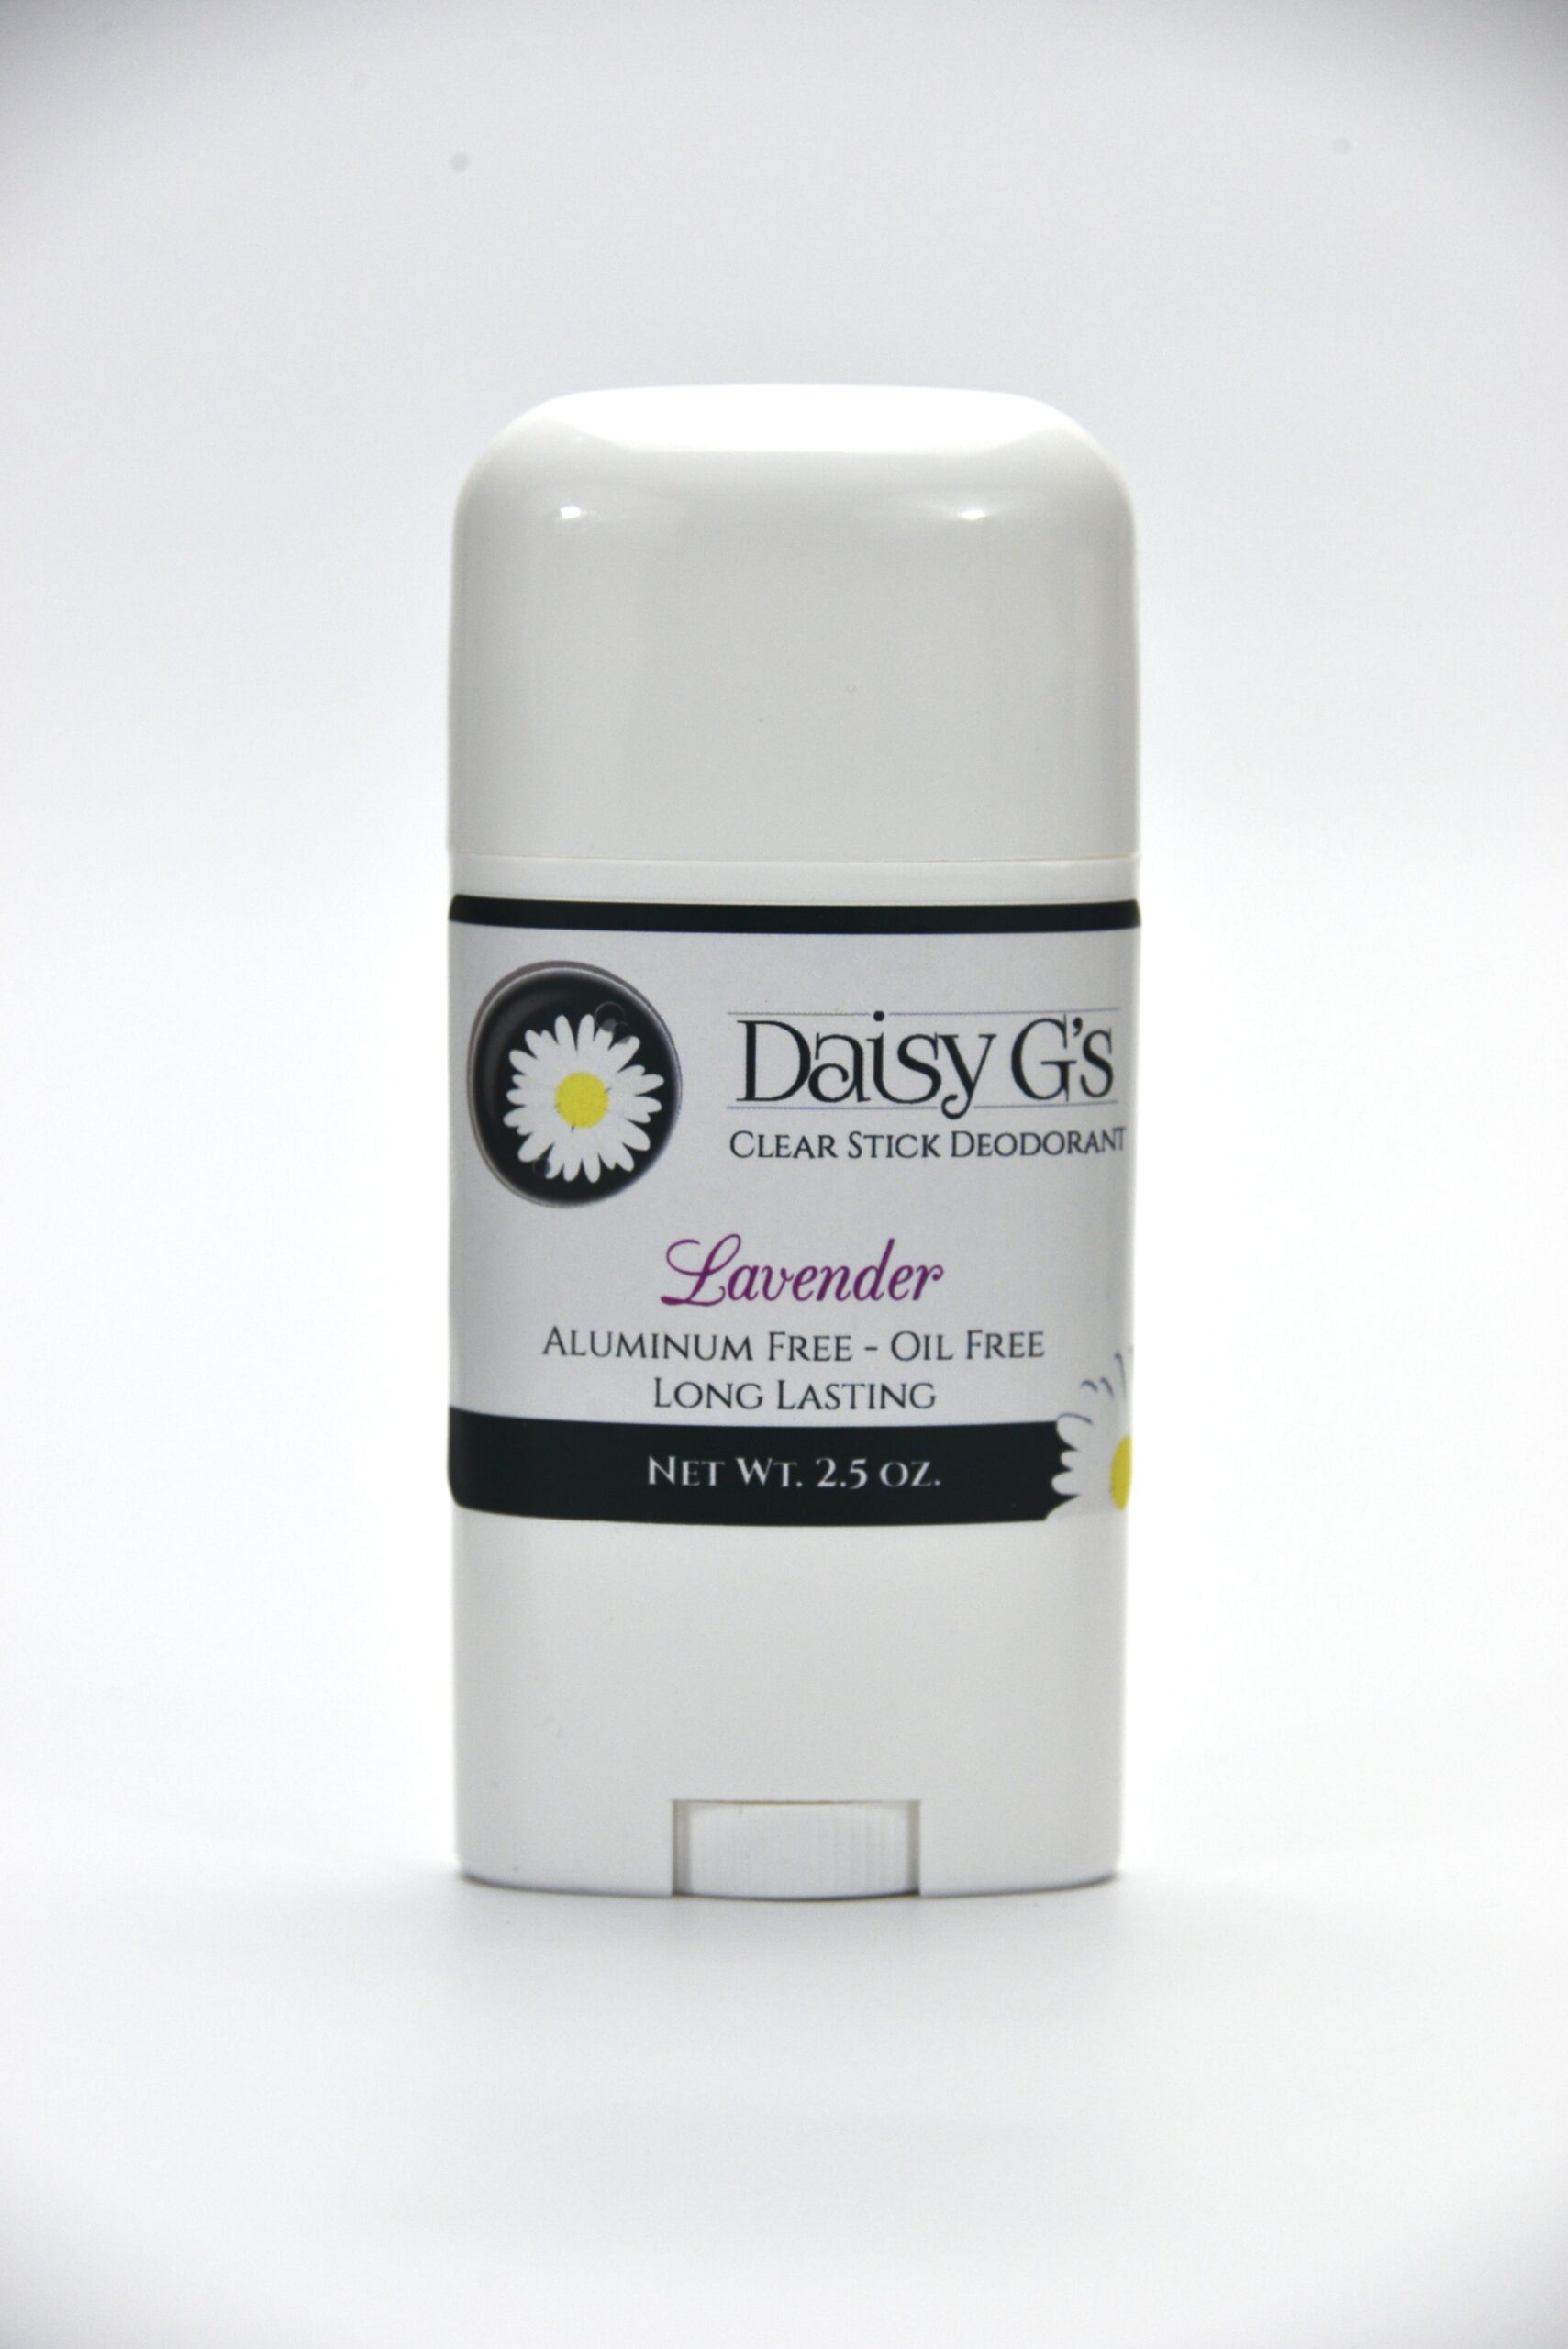 Clear Stick Deodorant Daisy G's Free Safe and Effective All